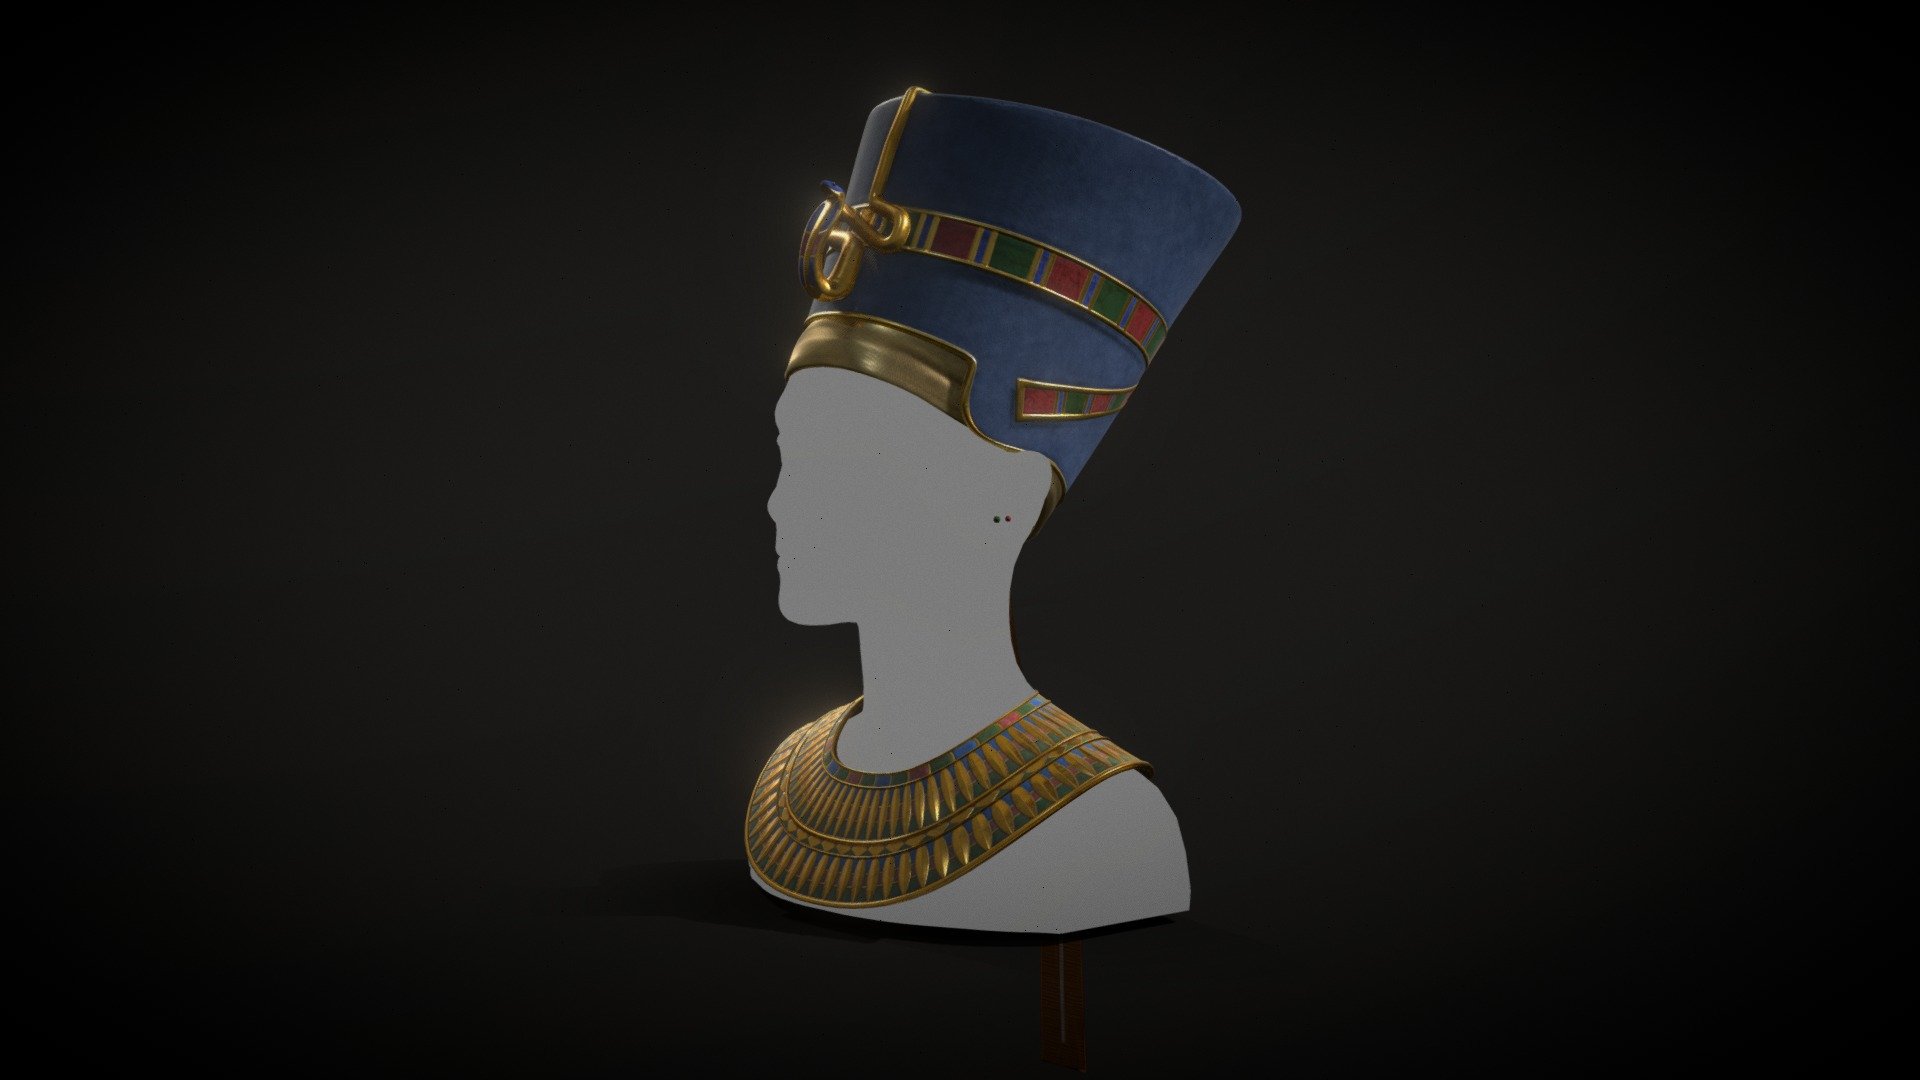 Recreation of the crown and jewelry worn by Nefertiti, the wife of pharaoh Akhenaten. Based upon the 3d scan of the famous bust that depicts her.

As I am a huge fan of cultural heritage and ancient relics, I decided to create a full body visualisation of Neferteti with Metahuman and Unreal 5. While working on that, it came to my mind remake the well known bust with focus on the clothing, since the bodymesh wasn't created by me. But I created all the accessoires and clothes, using Cinema 4D, Blender, Zbrush and Substance Painter.

I'll paste a link to the full project when it's finished. But in the meantime: Enjoy 3d model